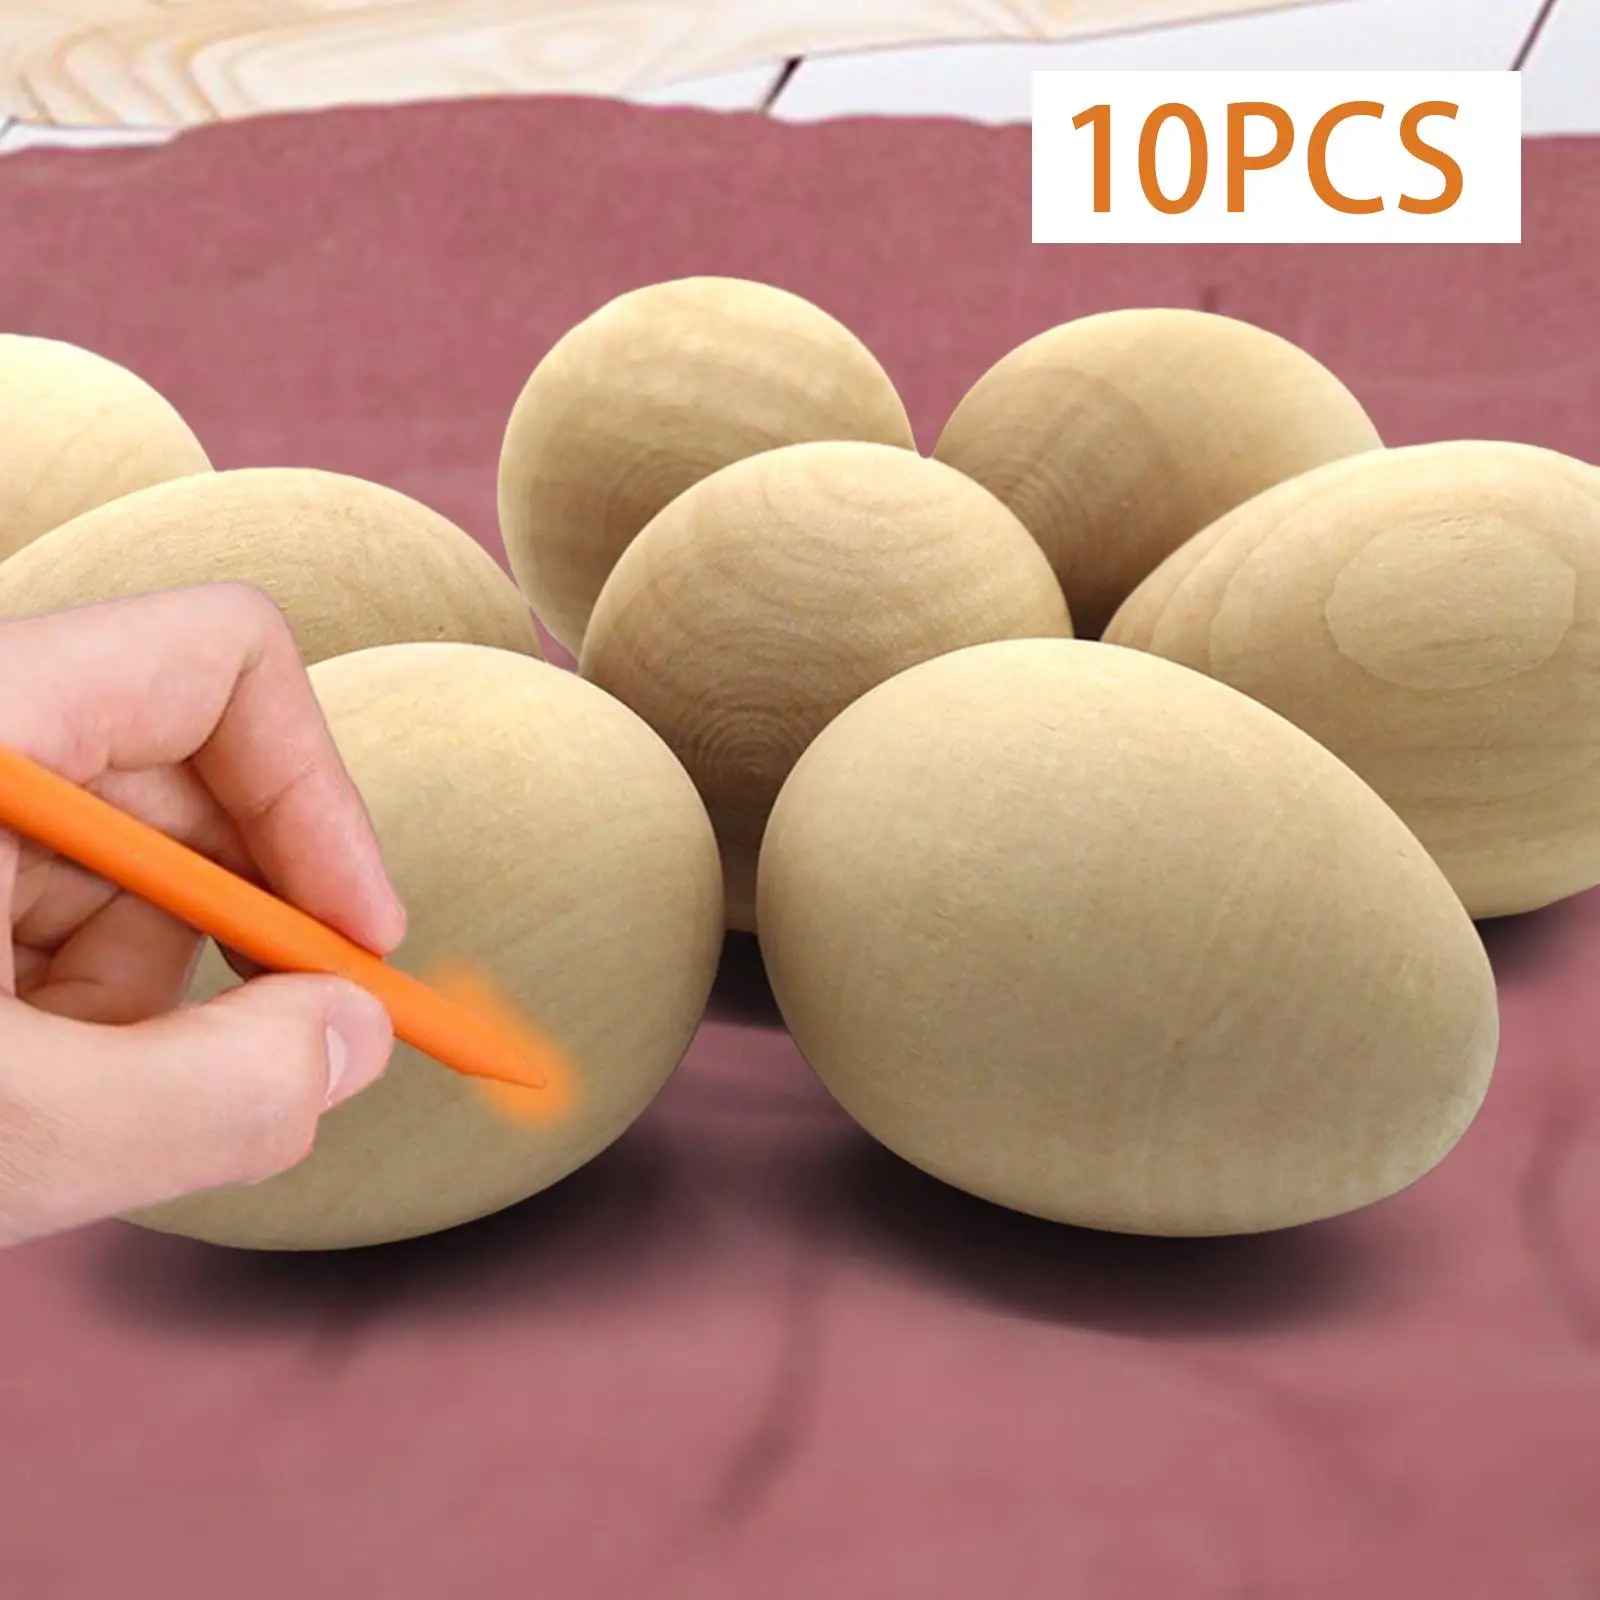 10Pcs Unfinished Wood Eggs with Flat Bottom Wooden Blank Eggs for DIY Easter images - 3